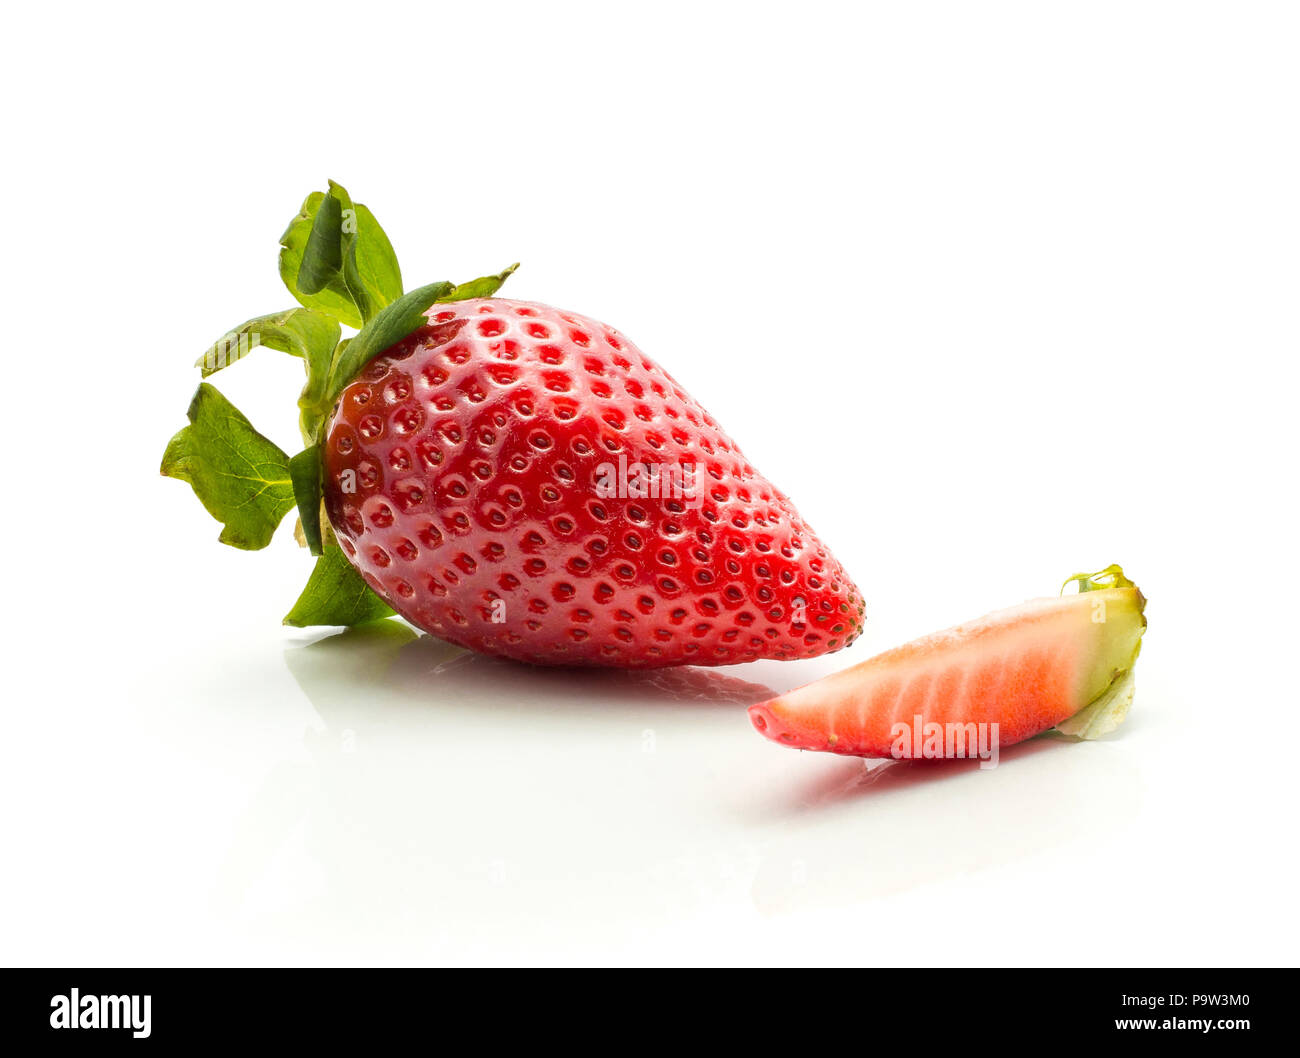 Garden strawberry and one slice isolated on white background fresh cut Stock Photo